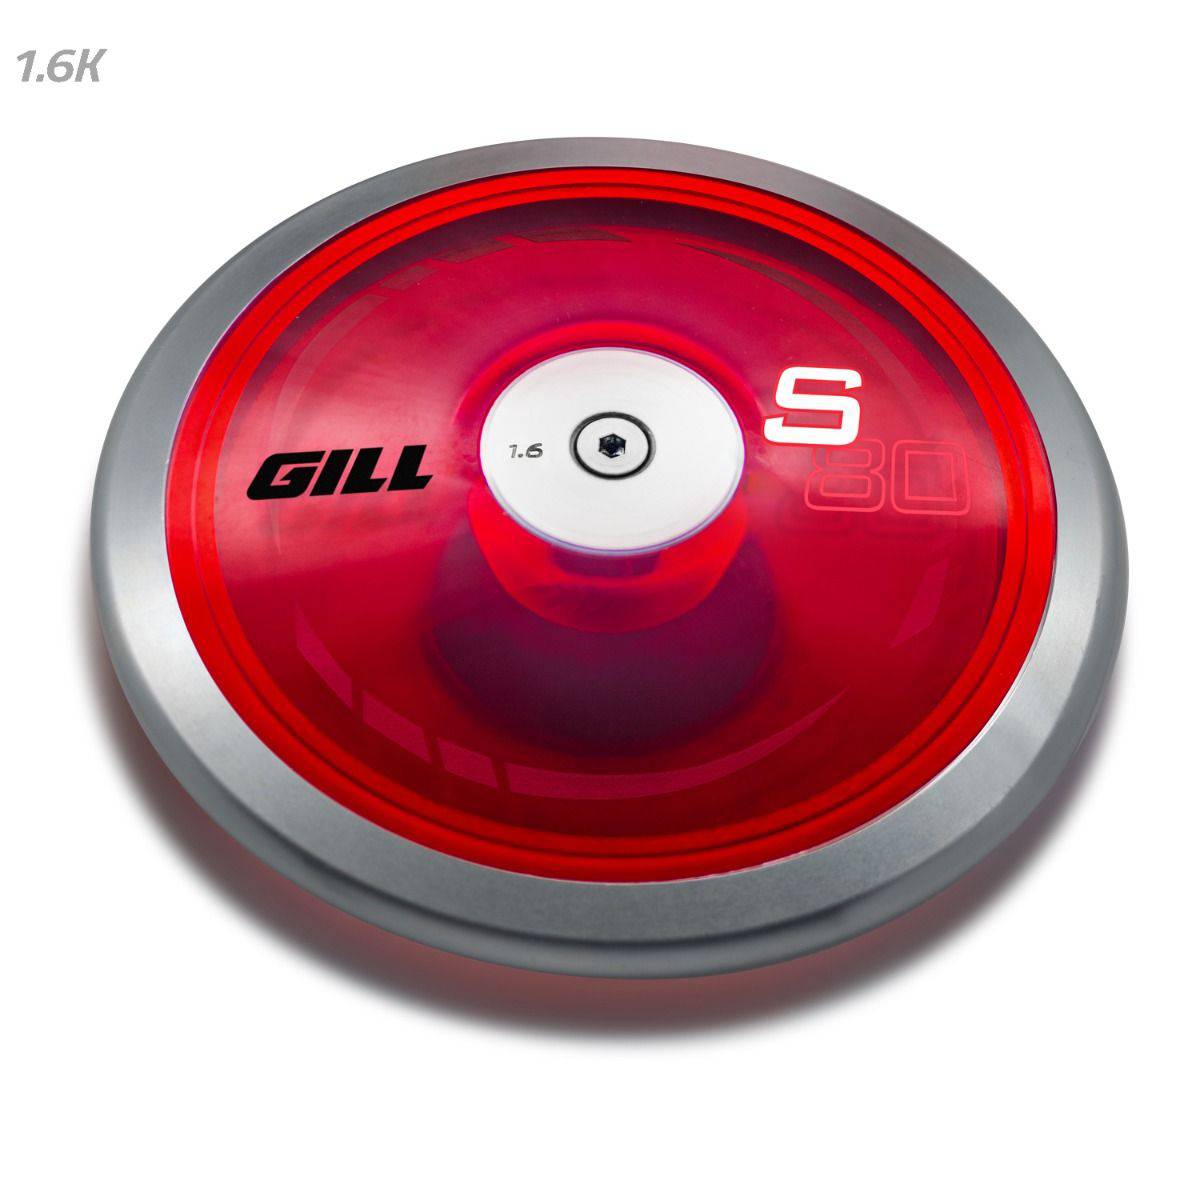 Gill Athletics 1.6K S80 Red Discus